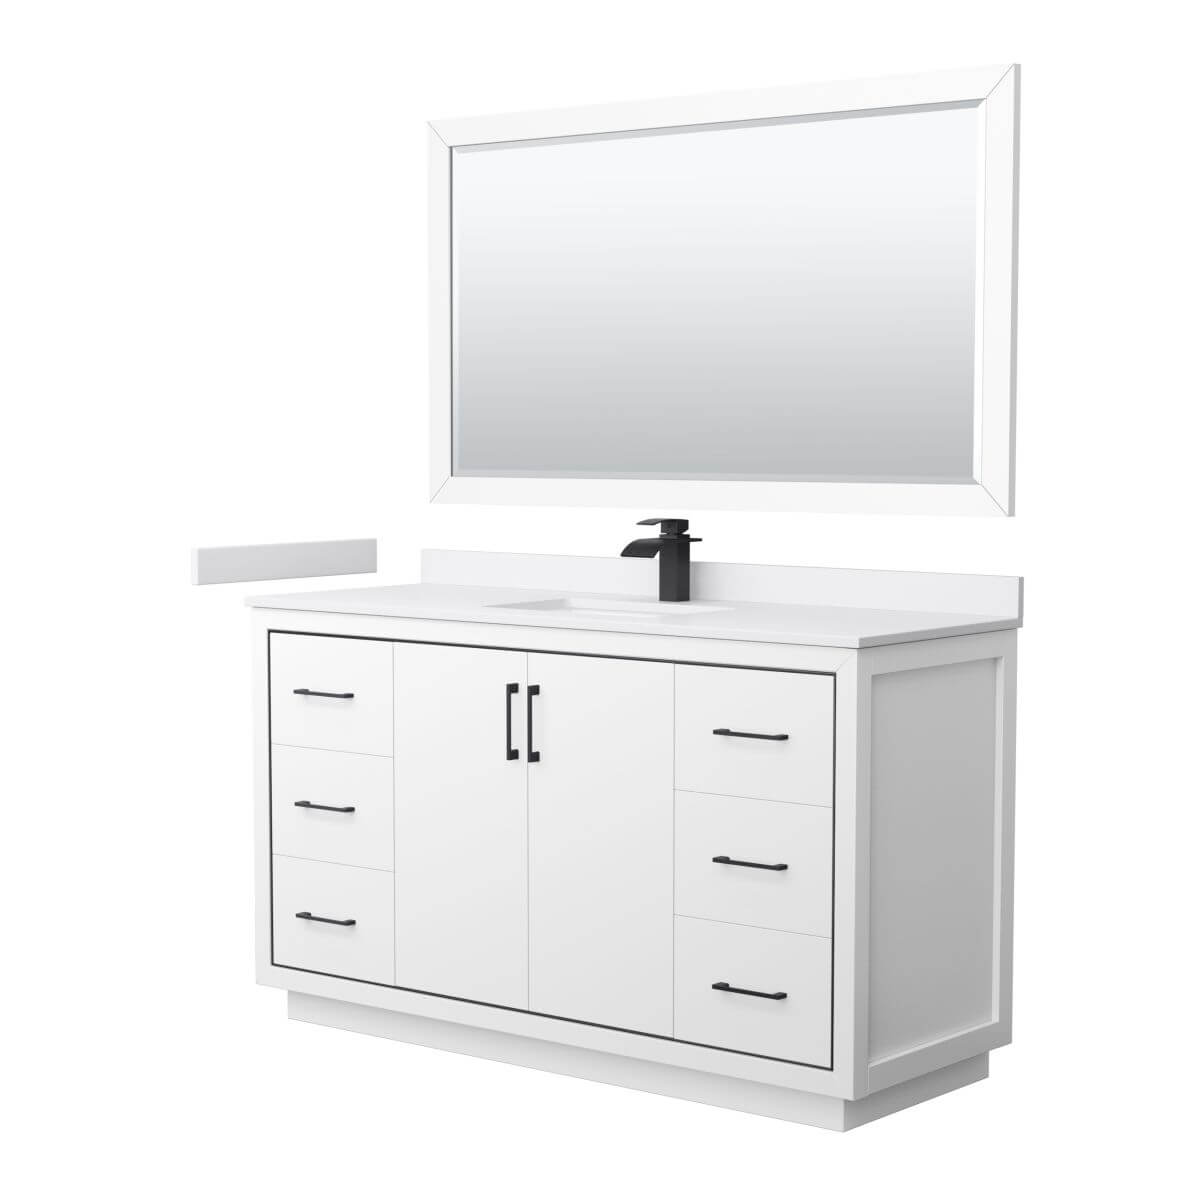 Wyndham Collection WCF111160SWBWCUNSM58 Icon 60 inch Single Bathroom Vanity in White with White Cultured Marble Countertop, Undermount Square Sink, Matte Black Trim and 58 Inch Mirror